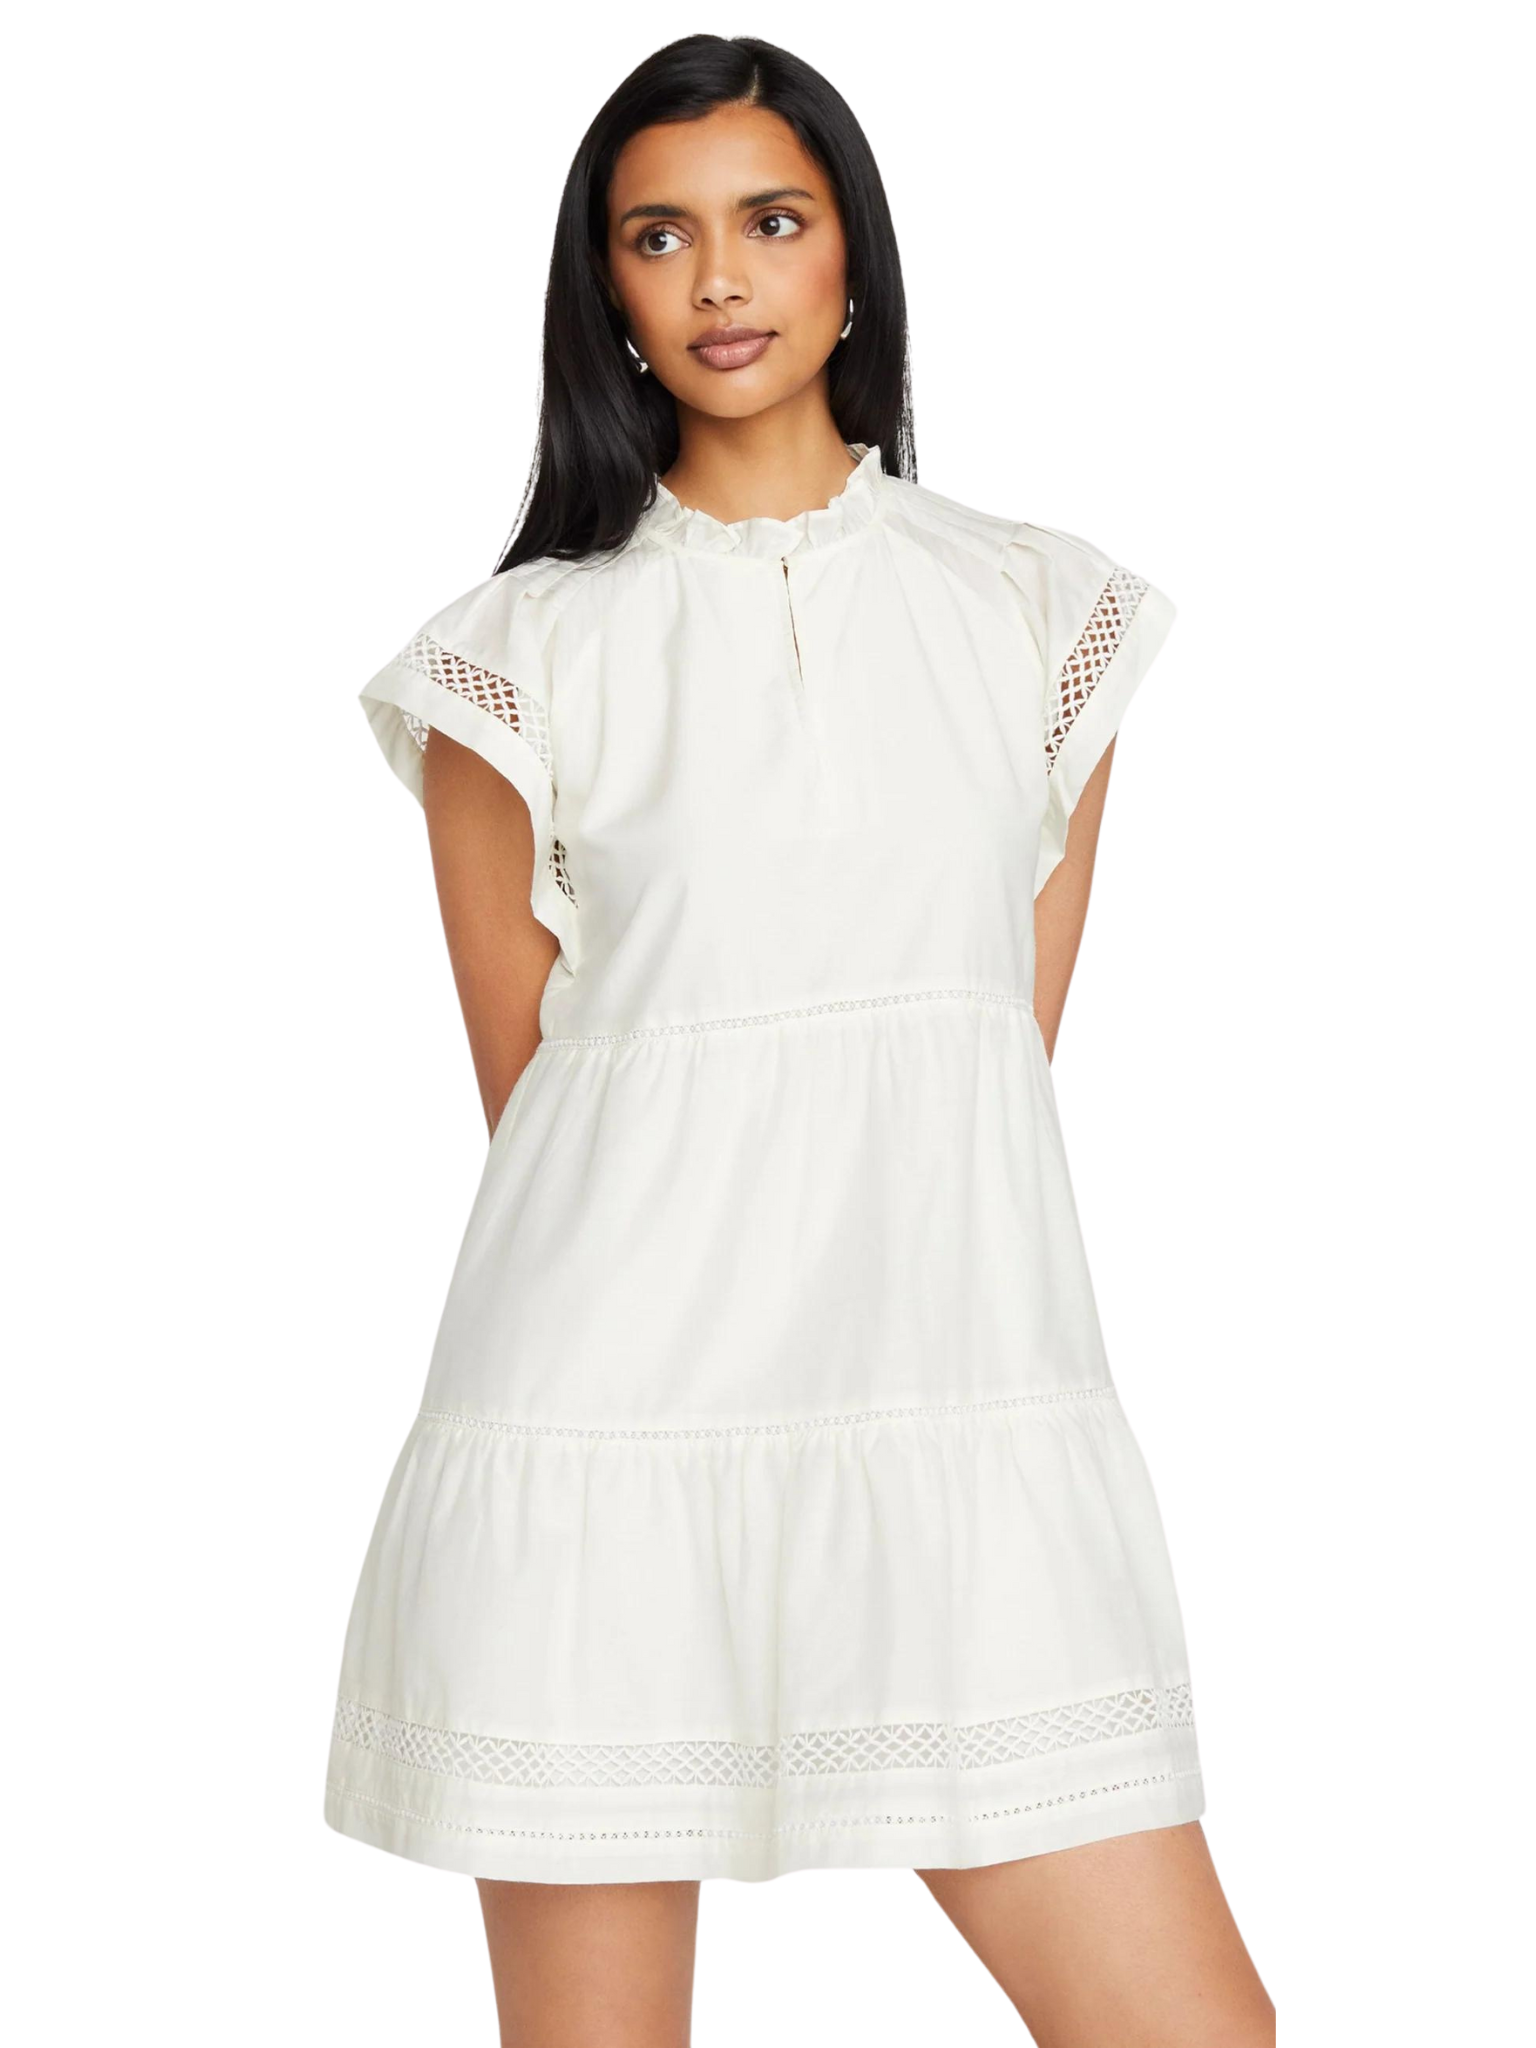 The name says it all. This flirty silhouette, featuring mixed trim detailing on both the flutter sleeves and tiered body, delivers wear-anywhere everyday style. Our Day Dress is a seasonless Marie Oliver staple.